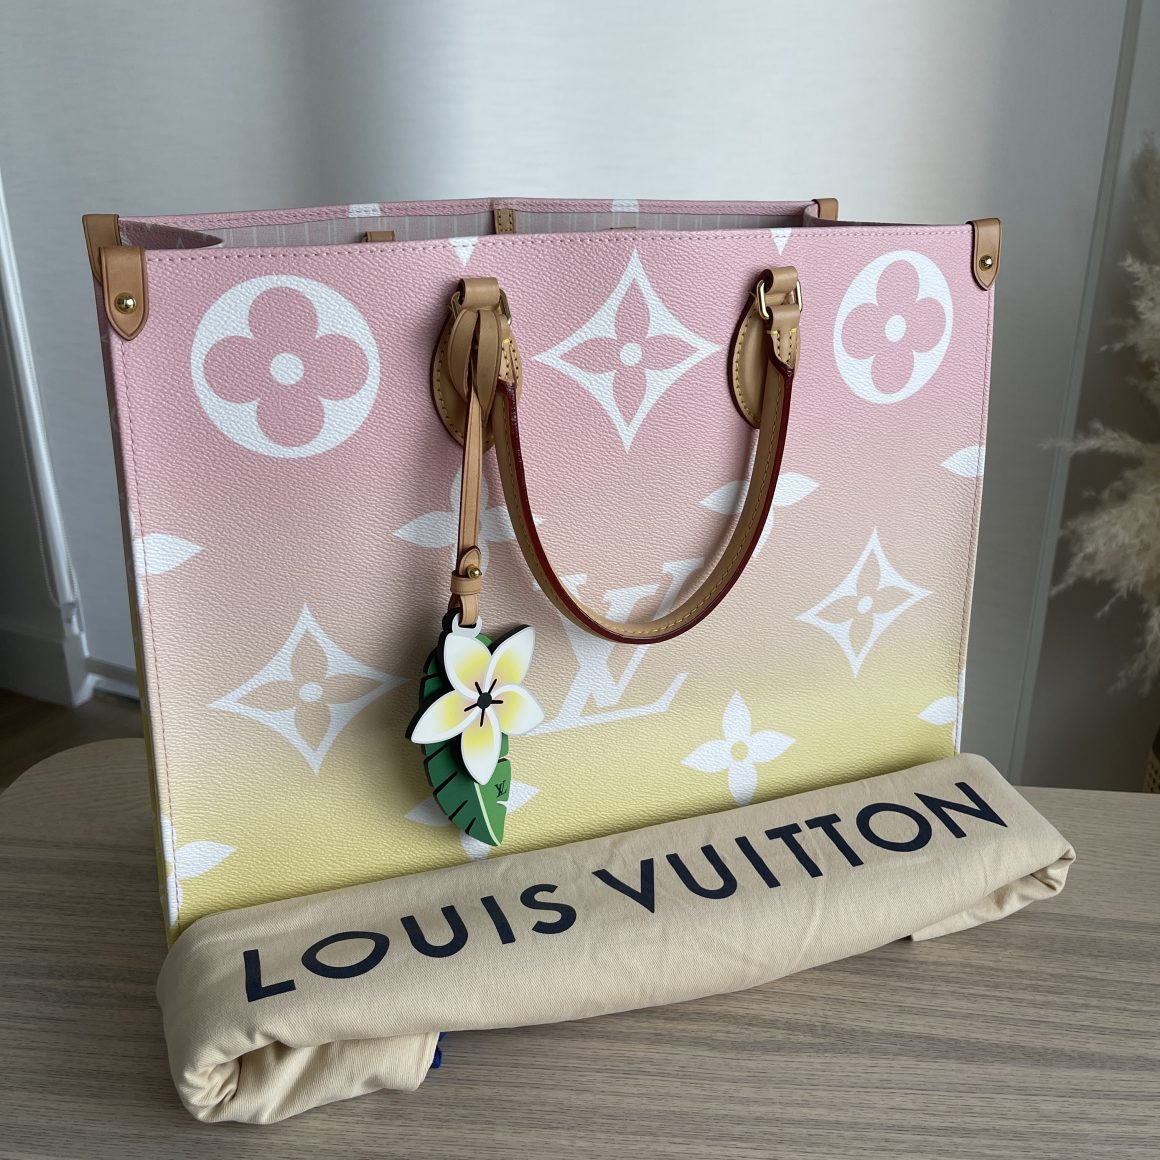 Louis Vuitton On the Go GM Pool, Pink/Yellow Ombre, New in Dustbag